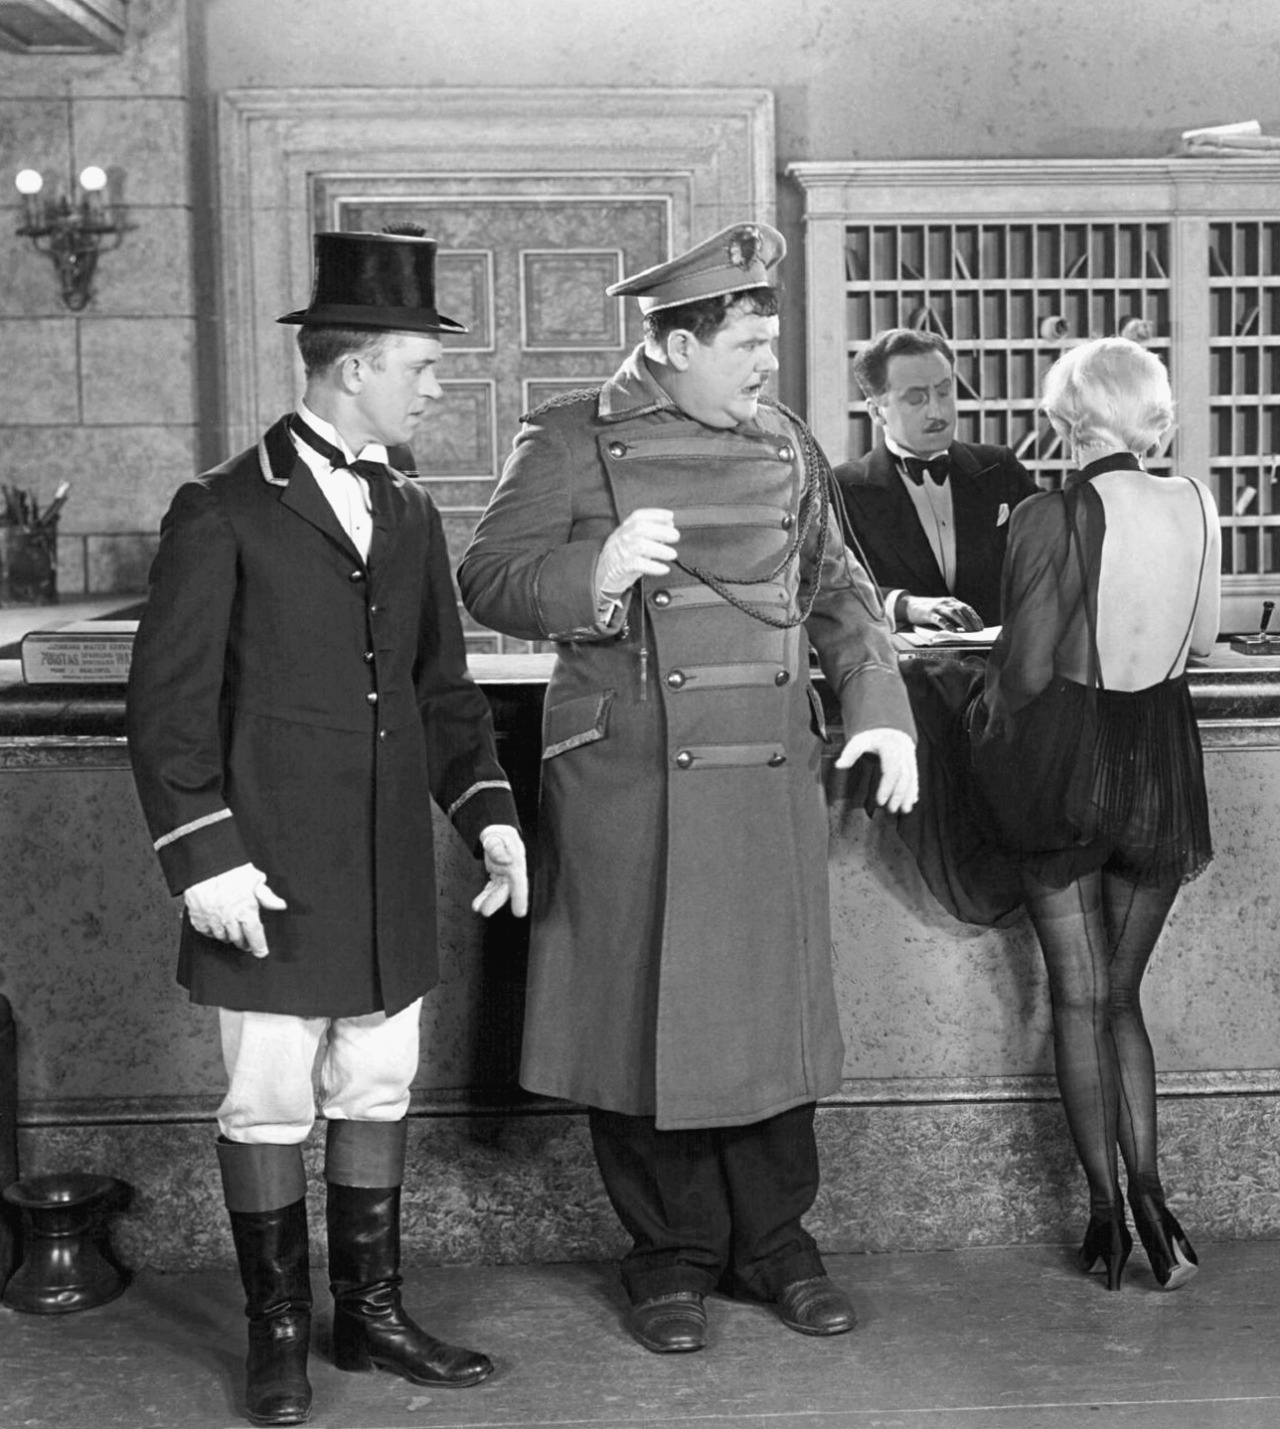 Double Whoopee (1929) #Stan Laurel#Oliver Hardy#Rolfe Sedan#Jean Harlow #Laurel and Hardy #Double Whoopee#1929#1920s#silent films#movies